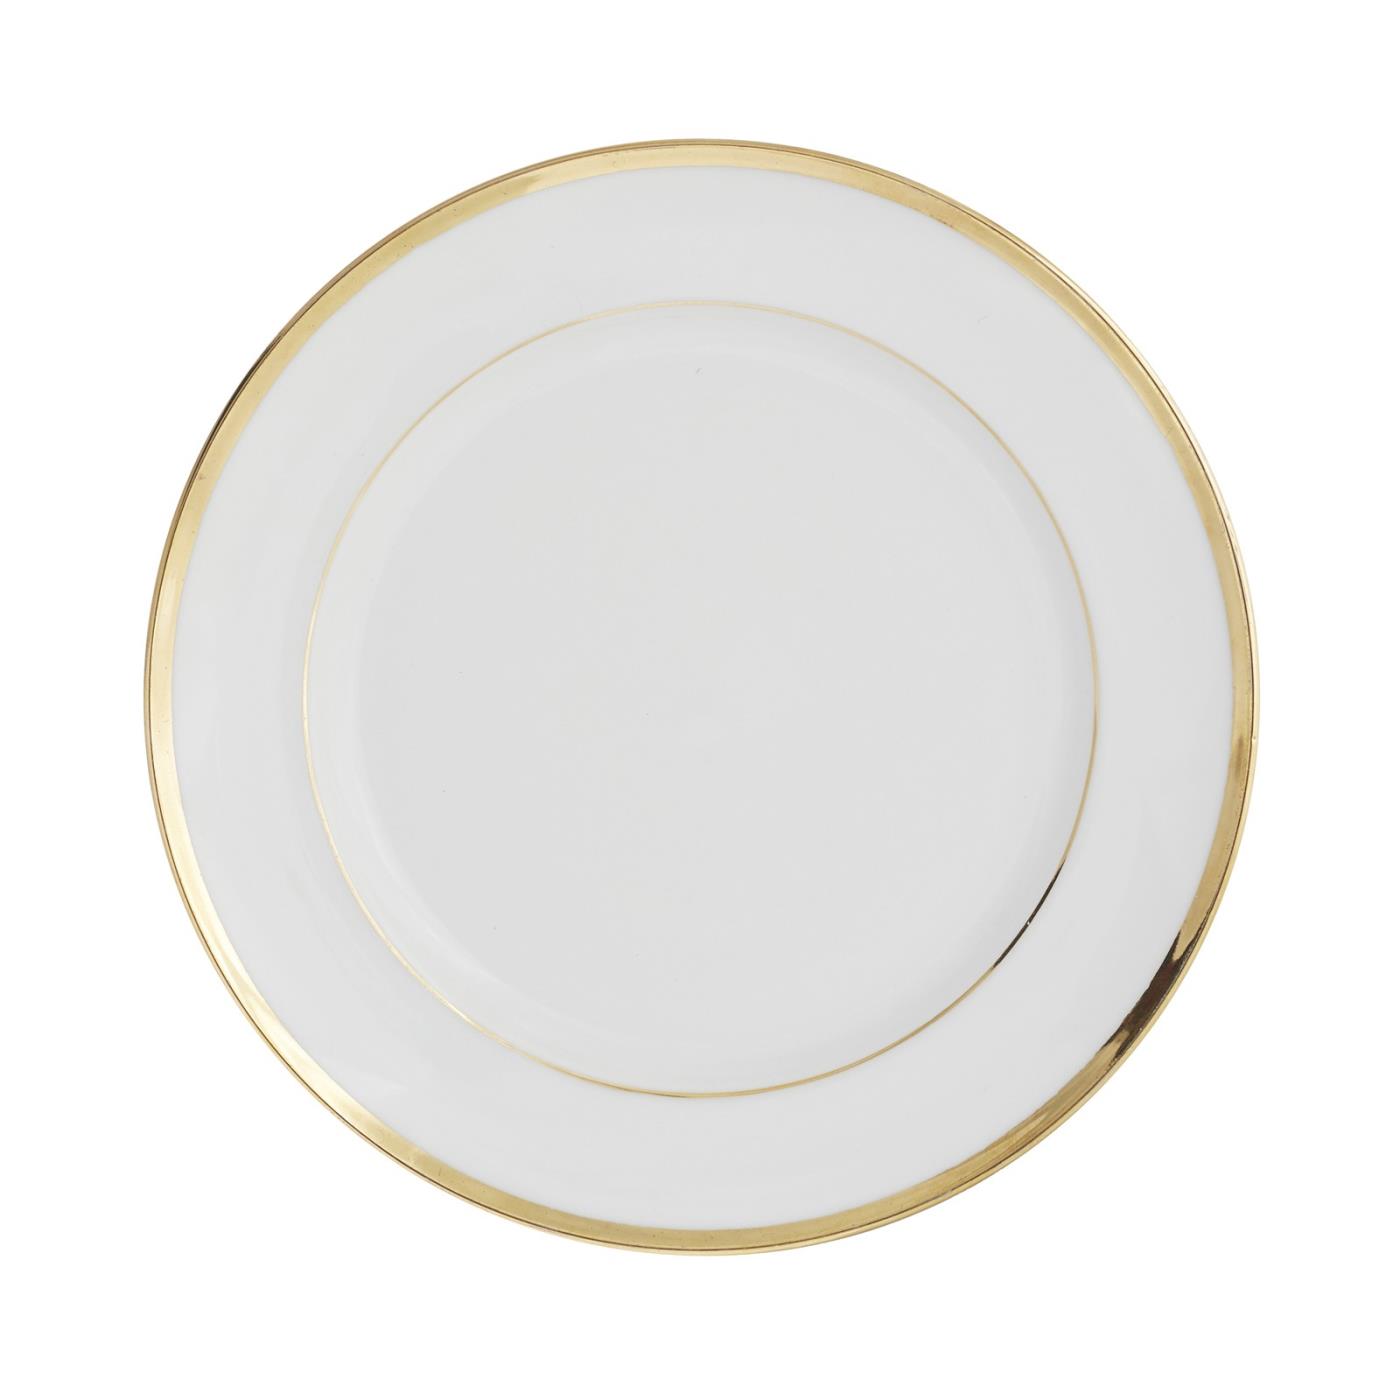 Estate Gold Collection -  Estate Gold B&B Plate 6.75"